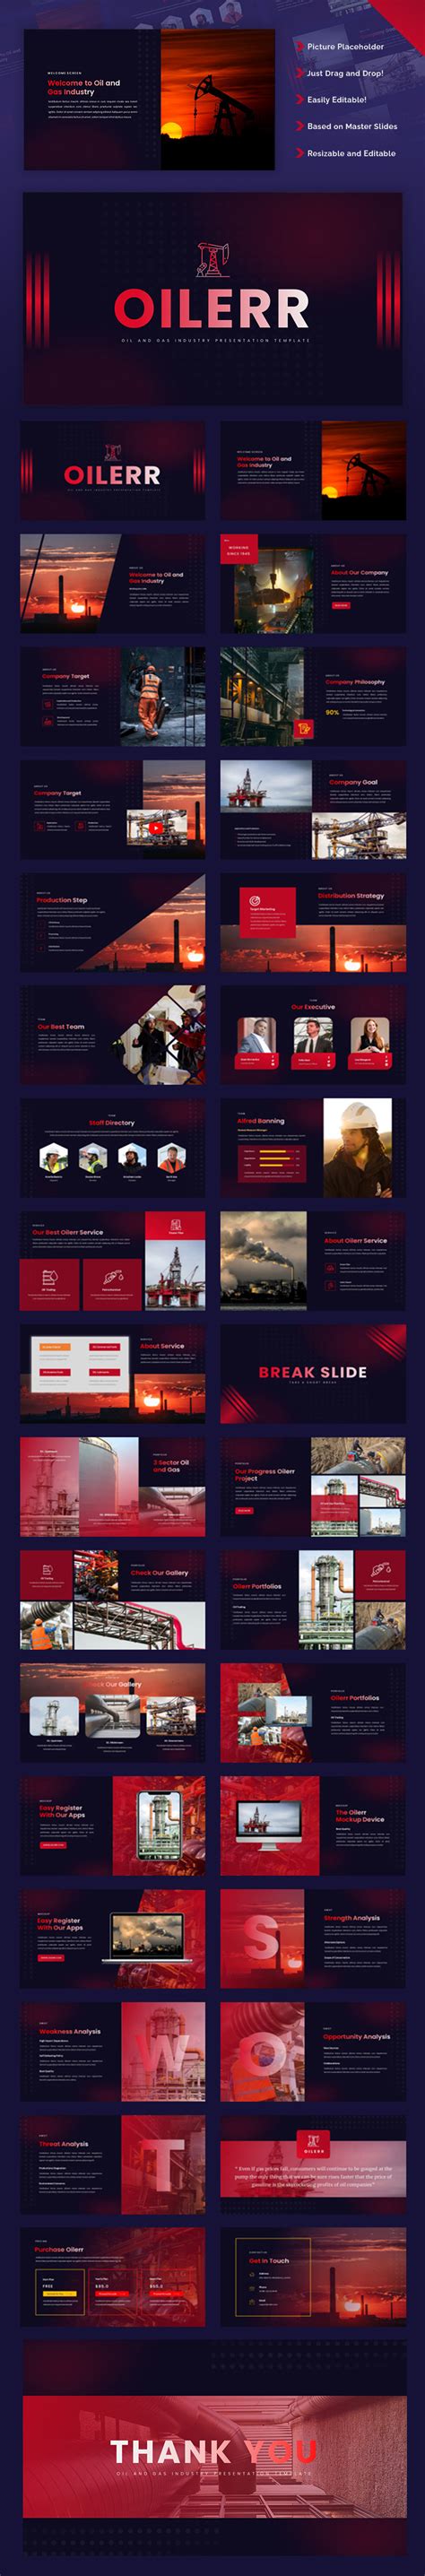 Oilerr-Oil and Gas Industry Presentation Google Slides Template